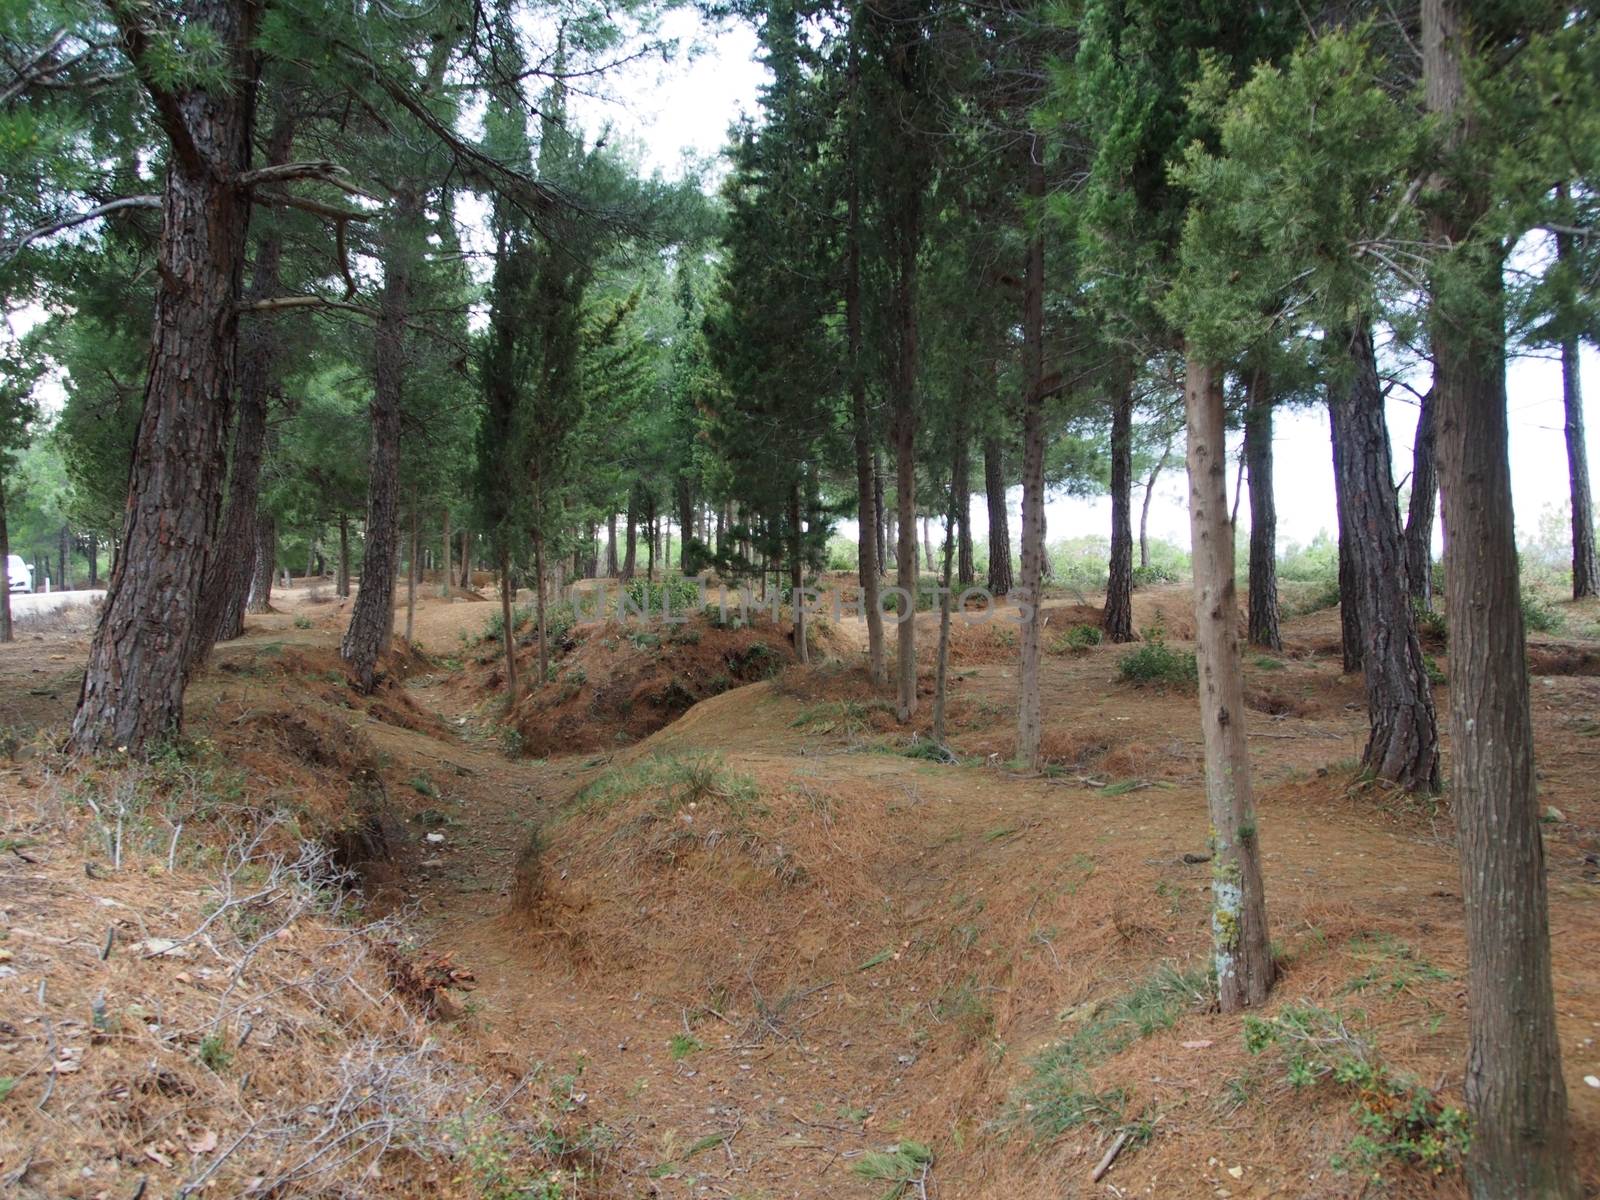 Remains of the 1915 ANZAC trenches at Gallipoli from World War 1, 100 years old.